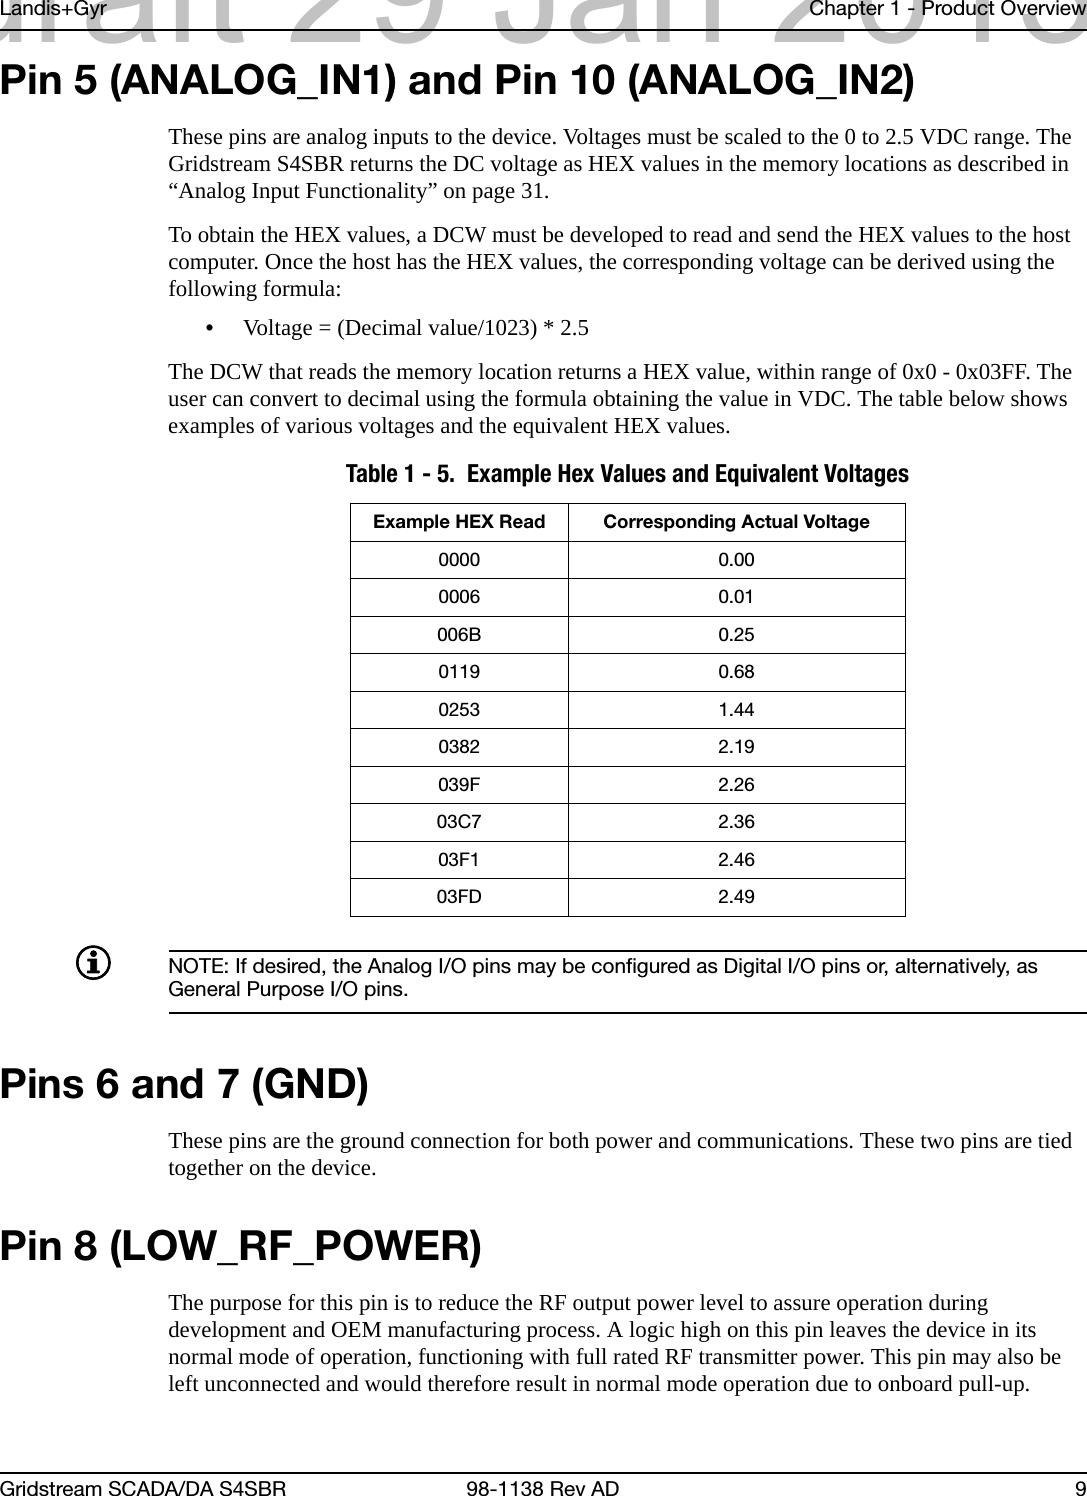 Landis+Gyr Chapter 1 - Product OverviewGridstream SCADA/DA S4SBR 98-1138 Rev AD 9Pin 5 (ANALOG_IN1) and Pin 10 (ANALOG_IN2)These pins are analog inputs to the device. Voltages must be scaled to the 0 to 2.5 VDC range. The Gridstream S4SBR returns the DC voltage as HEX values in the memory locations as described in “Analog Input Functionality” on page 31.To obtain the HEX values, a DCW must be developed to read and send the HEX values to the host computer. Once the host has the HEX values, the corresponding voltage can be derived using the following formula:•Voltage = (Decimal value/1023) * 2.5The DCW that reads the memory location returns a HEX value, within range of 0x0 - 0x03FF. The user can convert to decimal using the formula obtaining the value in VDC. The table below shows examples of various voltages and the equivalent HEX values.NOTE: If desired, the Analog I/O pins may be configured as Digital I/O pins or, alternatively, as General Purpose I/O pins.Pins 6 and 7 (GND)These pins are the ground connection for both power and communications. These two pins are tied together on the device.Pin 8 (LOW_RF_POWER)The purpose for this pin is to reduce the RF output power level to assure operation during development and OEM manufacturing process. A logic high on this pin leaves the device in its normal mode of operation, functioning with full rated RF transmitter power. This pin may also be left unconnected and would therefore result in normal mode operation due to onboard pull-up. Table 1 - 5.  Example Hex Values and Equivalent VoltagesExample HEX Read Corresponding Actual Voltage0000 0.000006 0.01006B 0.250119 0.680253 1.440382 2.19039F 2.2603C7 2.3603F1 2.4603FD 2.49draft 29 Jan 2013